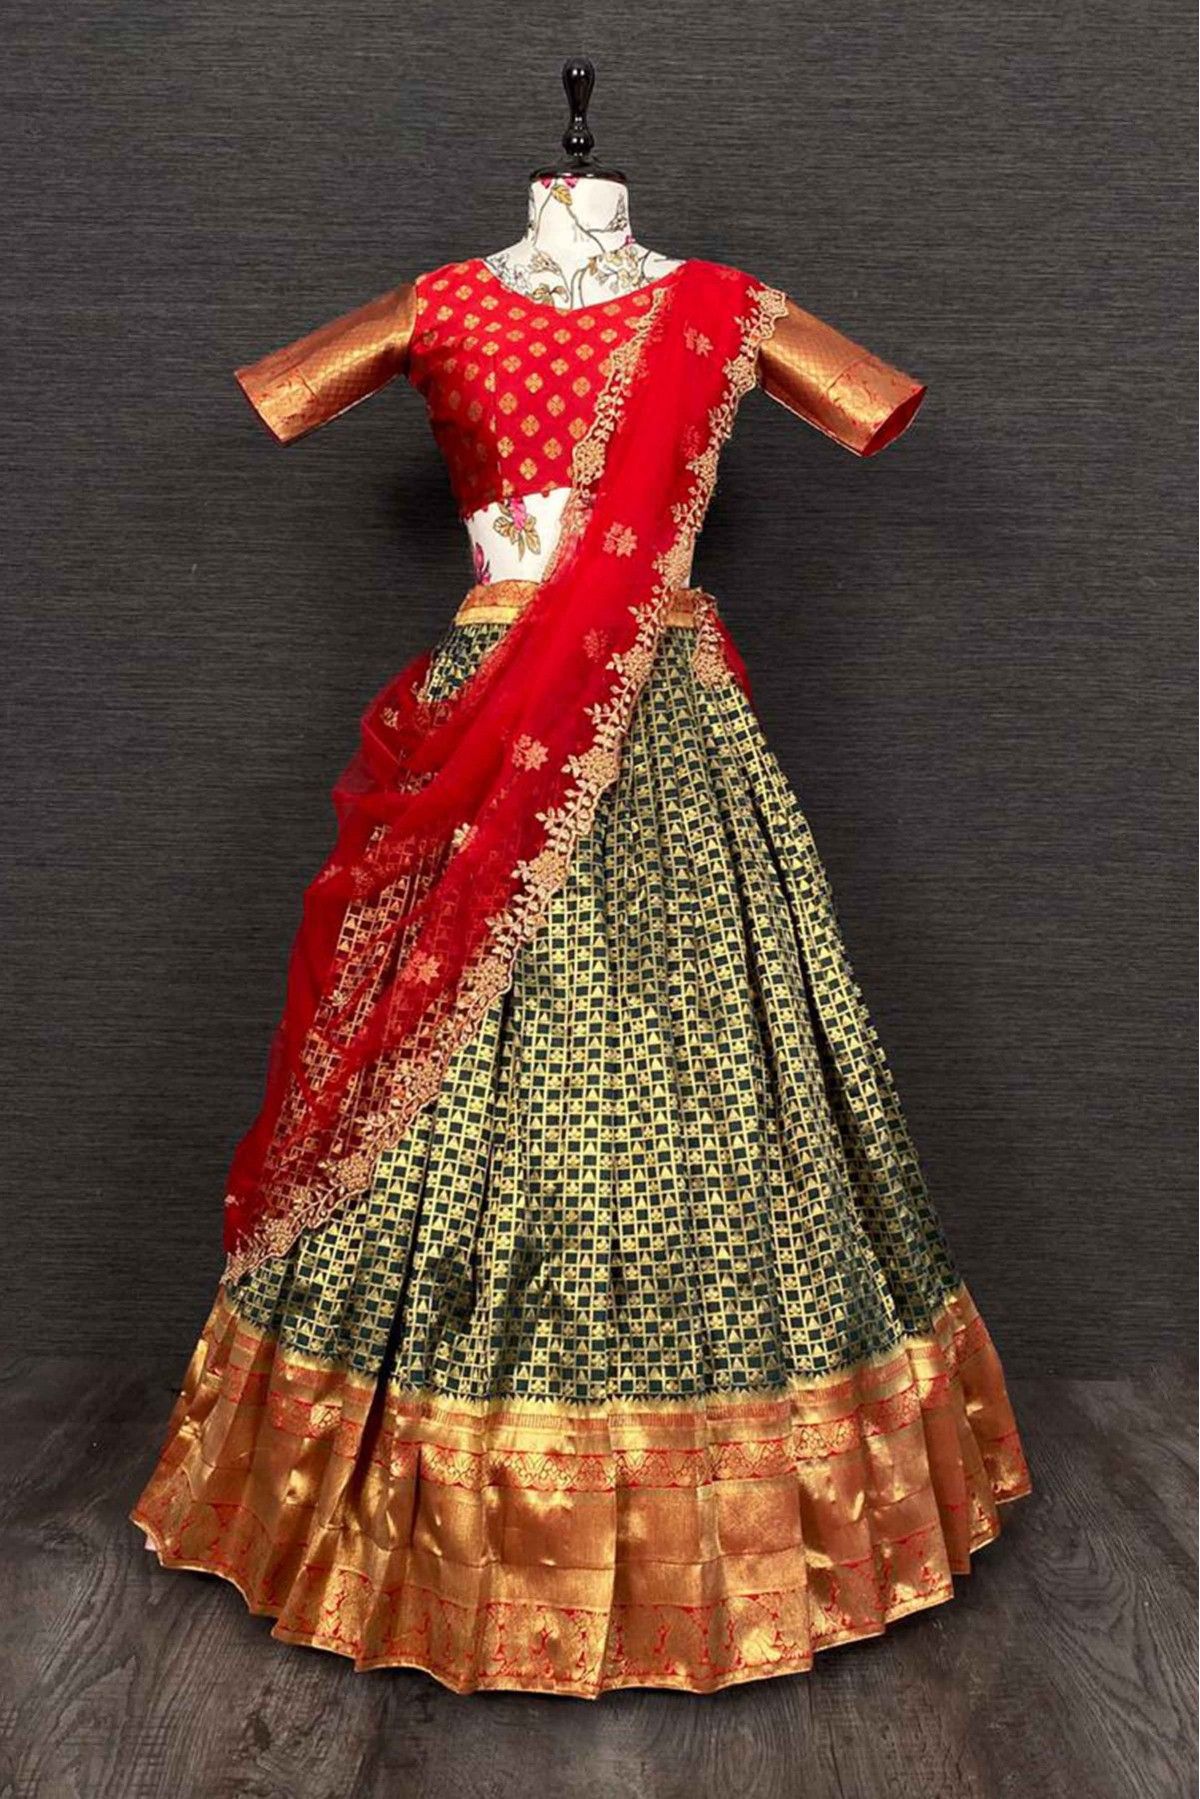 Buy Black Brocade Lehenga by Colorauction - Online shopping for Lehenga in  India